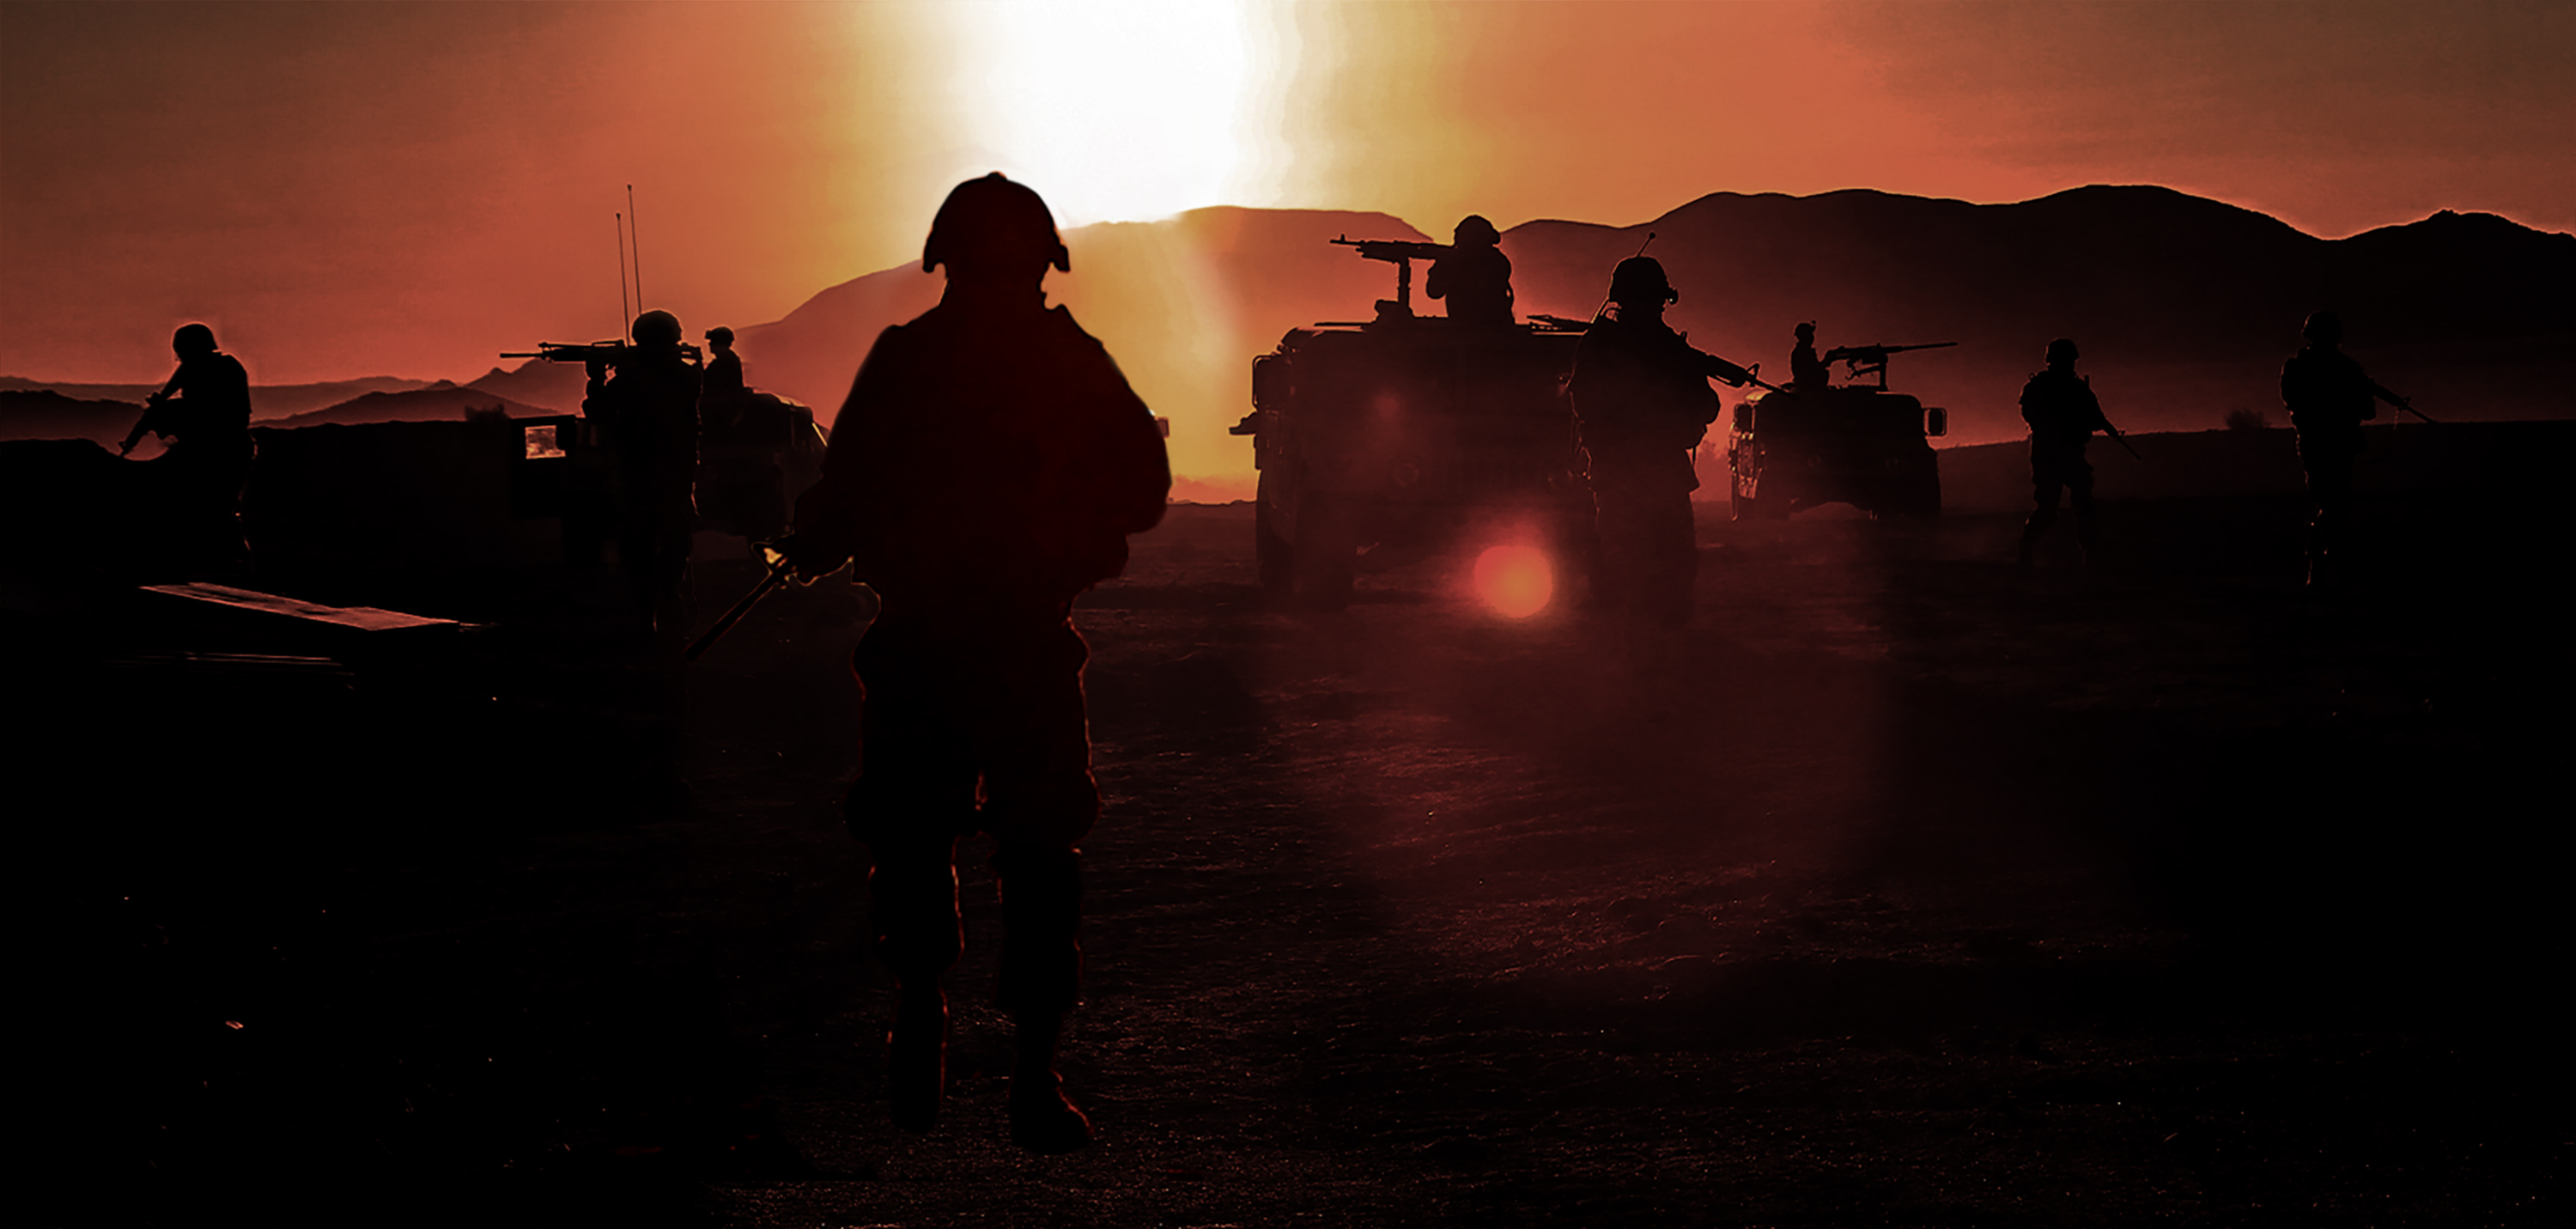 Servicemembers in silhouette